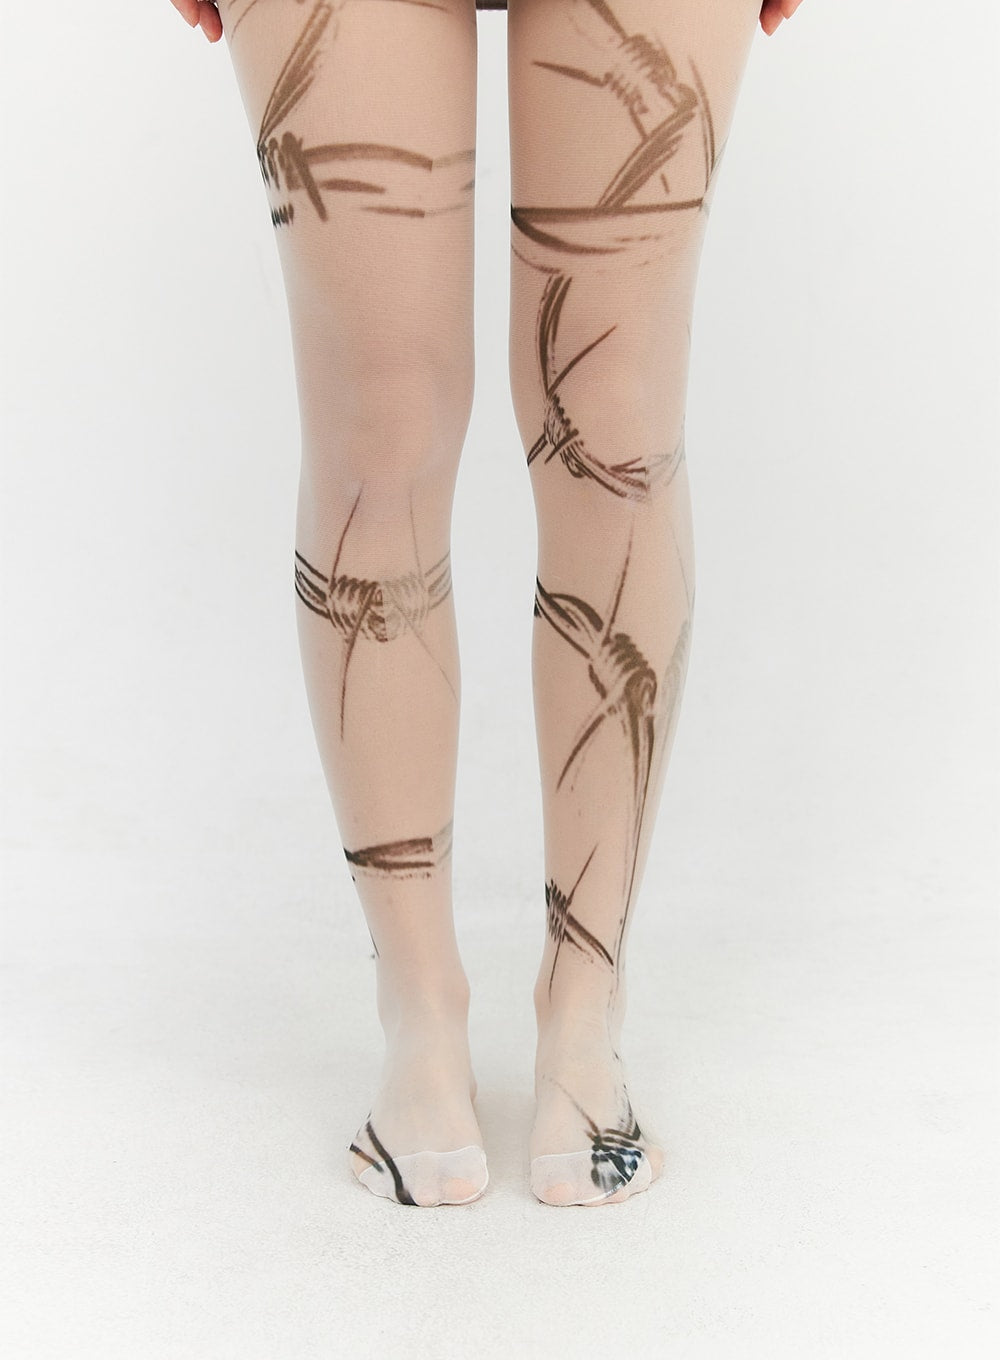 Butterflies Tattoo Tights , Design Tights, Tattoo Stockings , Printed Nude  Pantyhose - Etsy